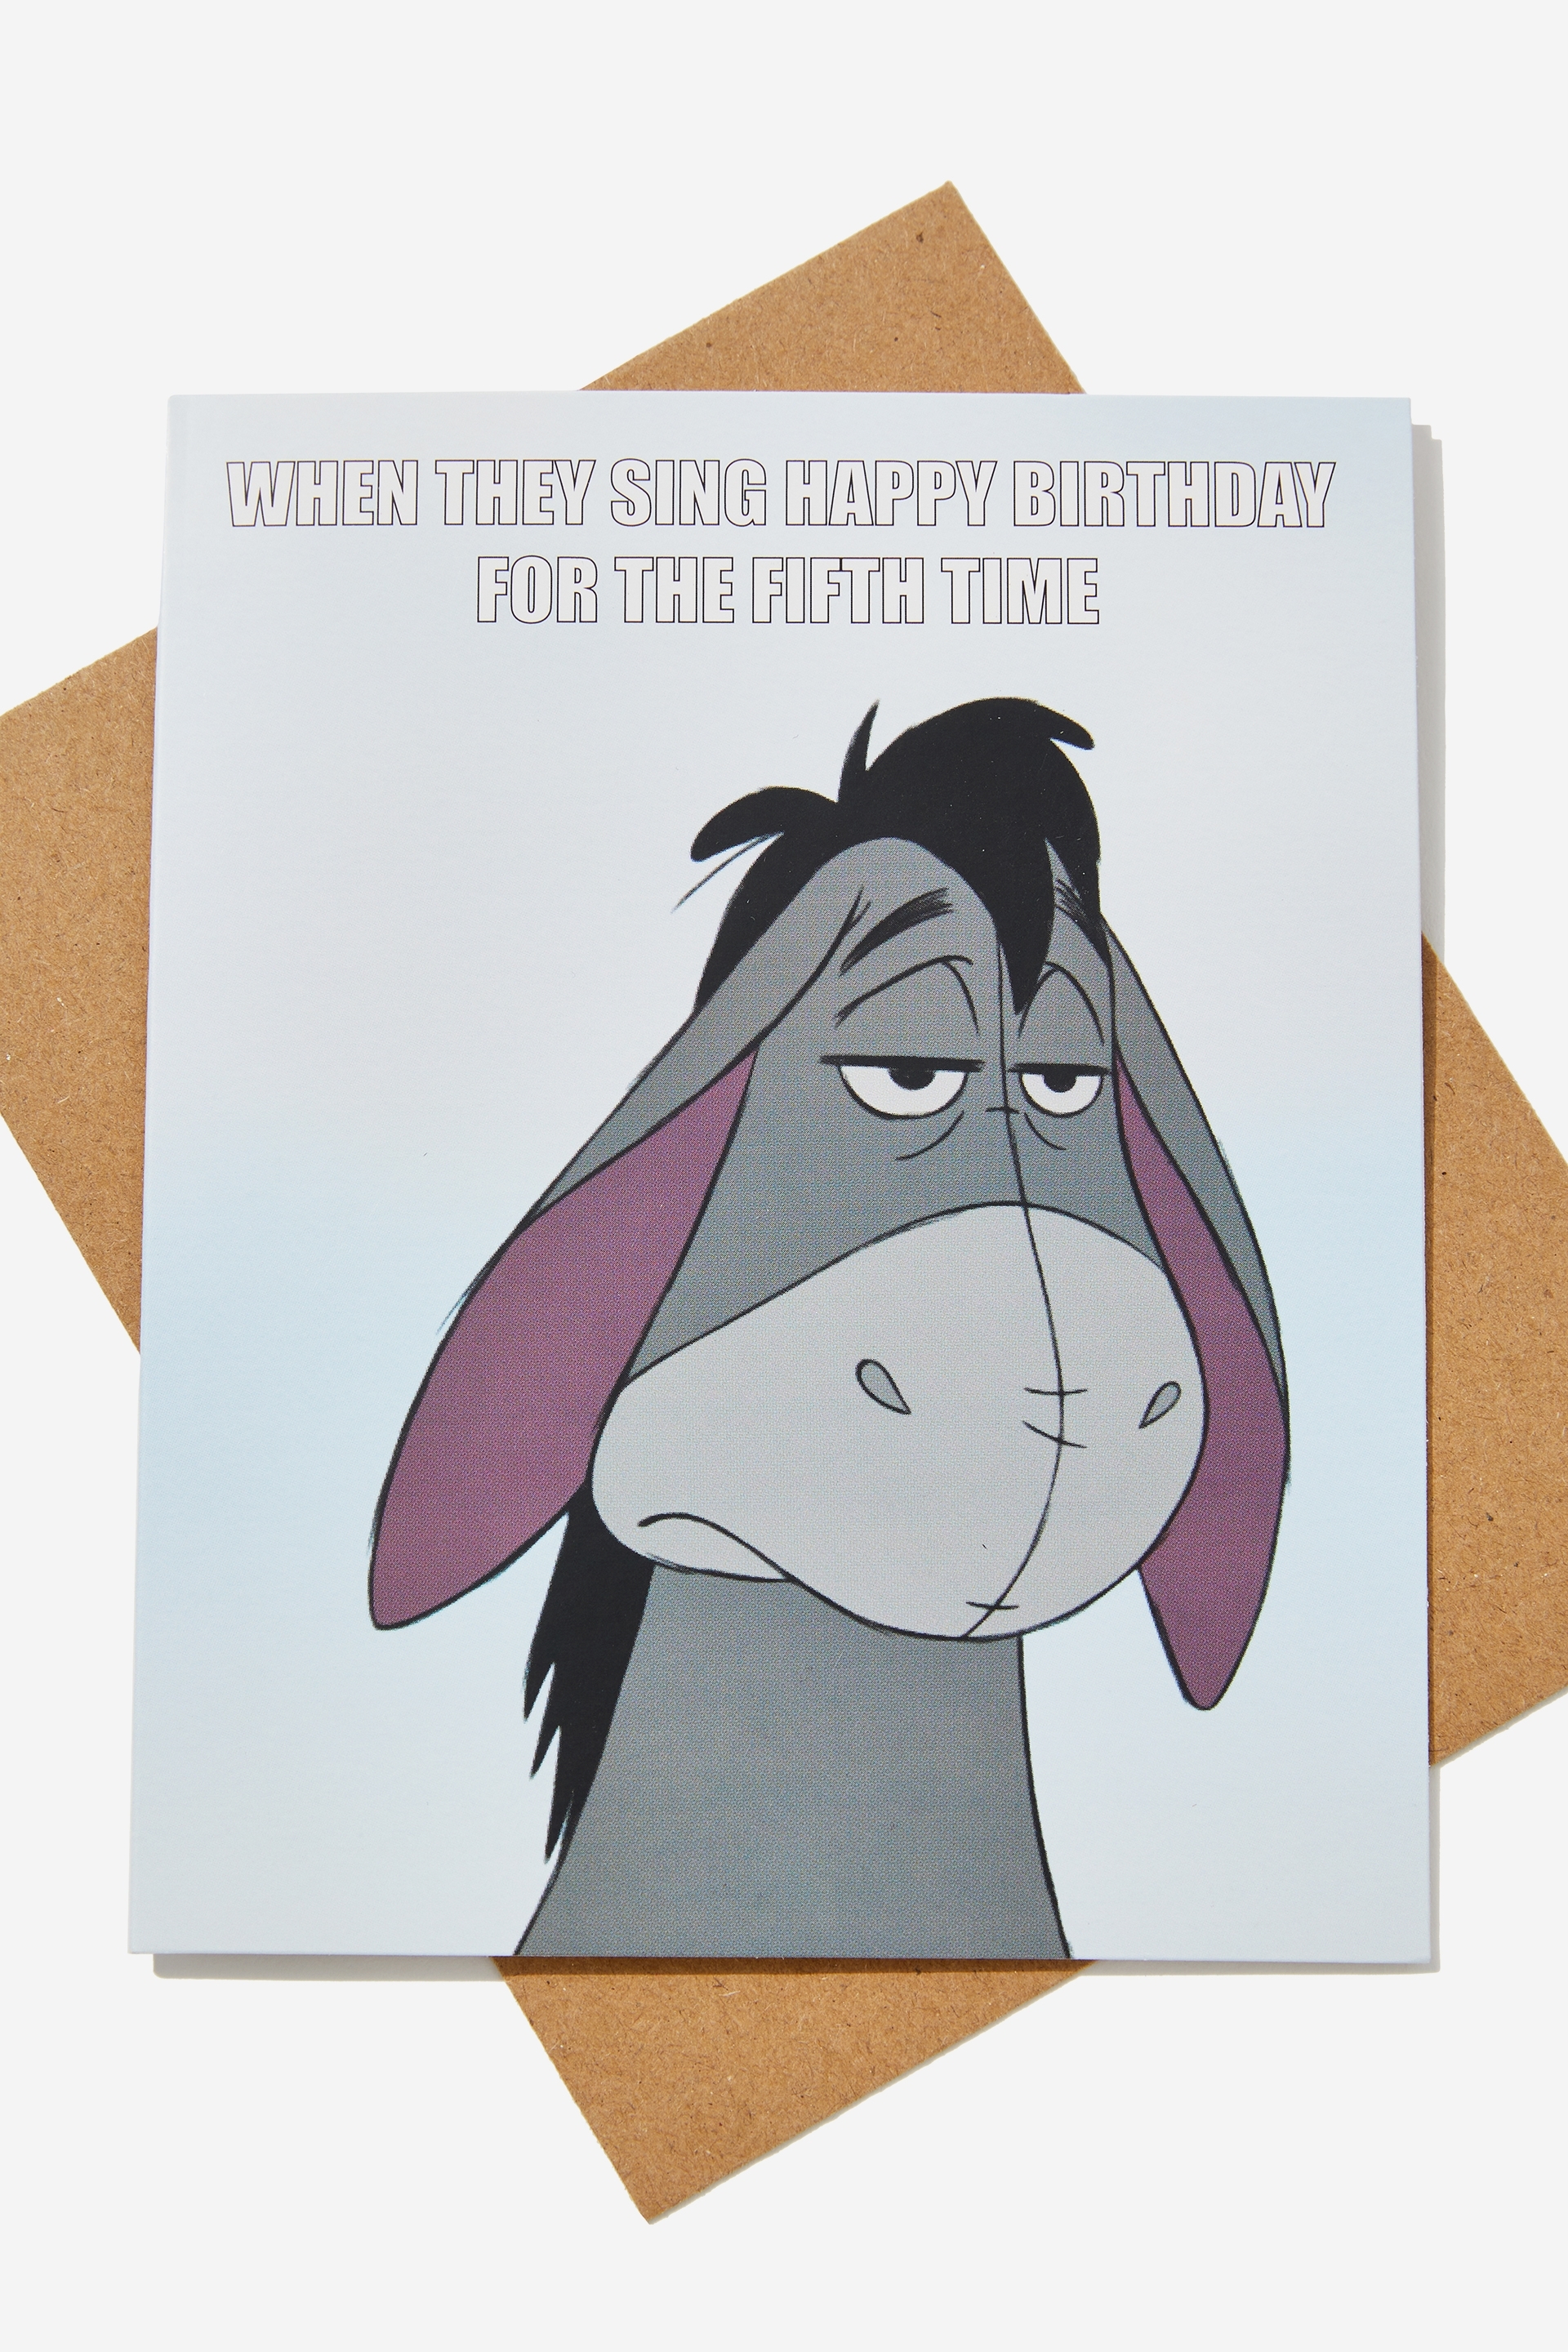 Typo - Winnie The Pooh Nice Birthday Card - Lcn dis wtp eeyore for the fifth time